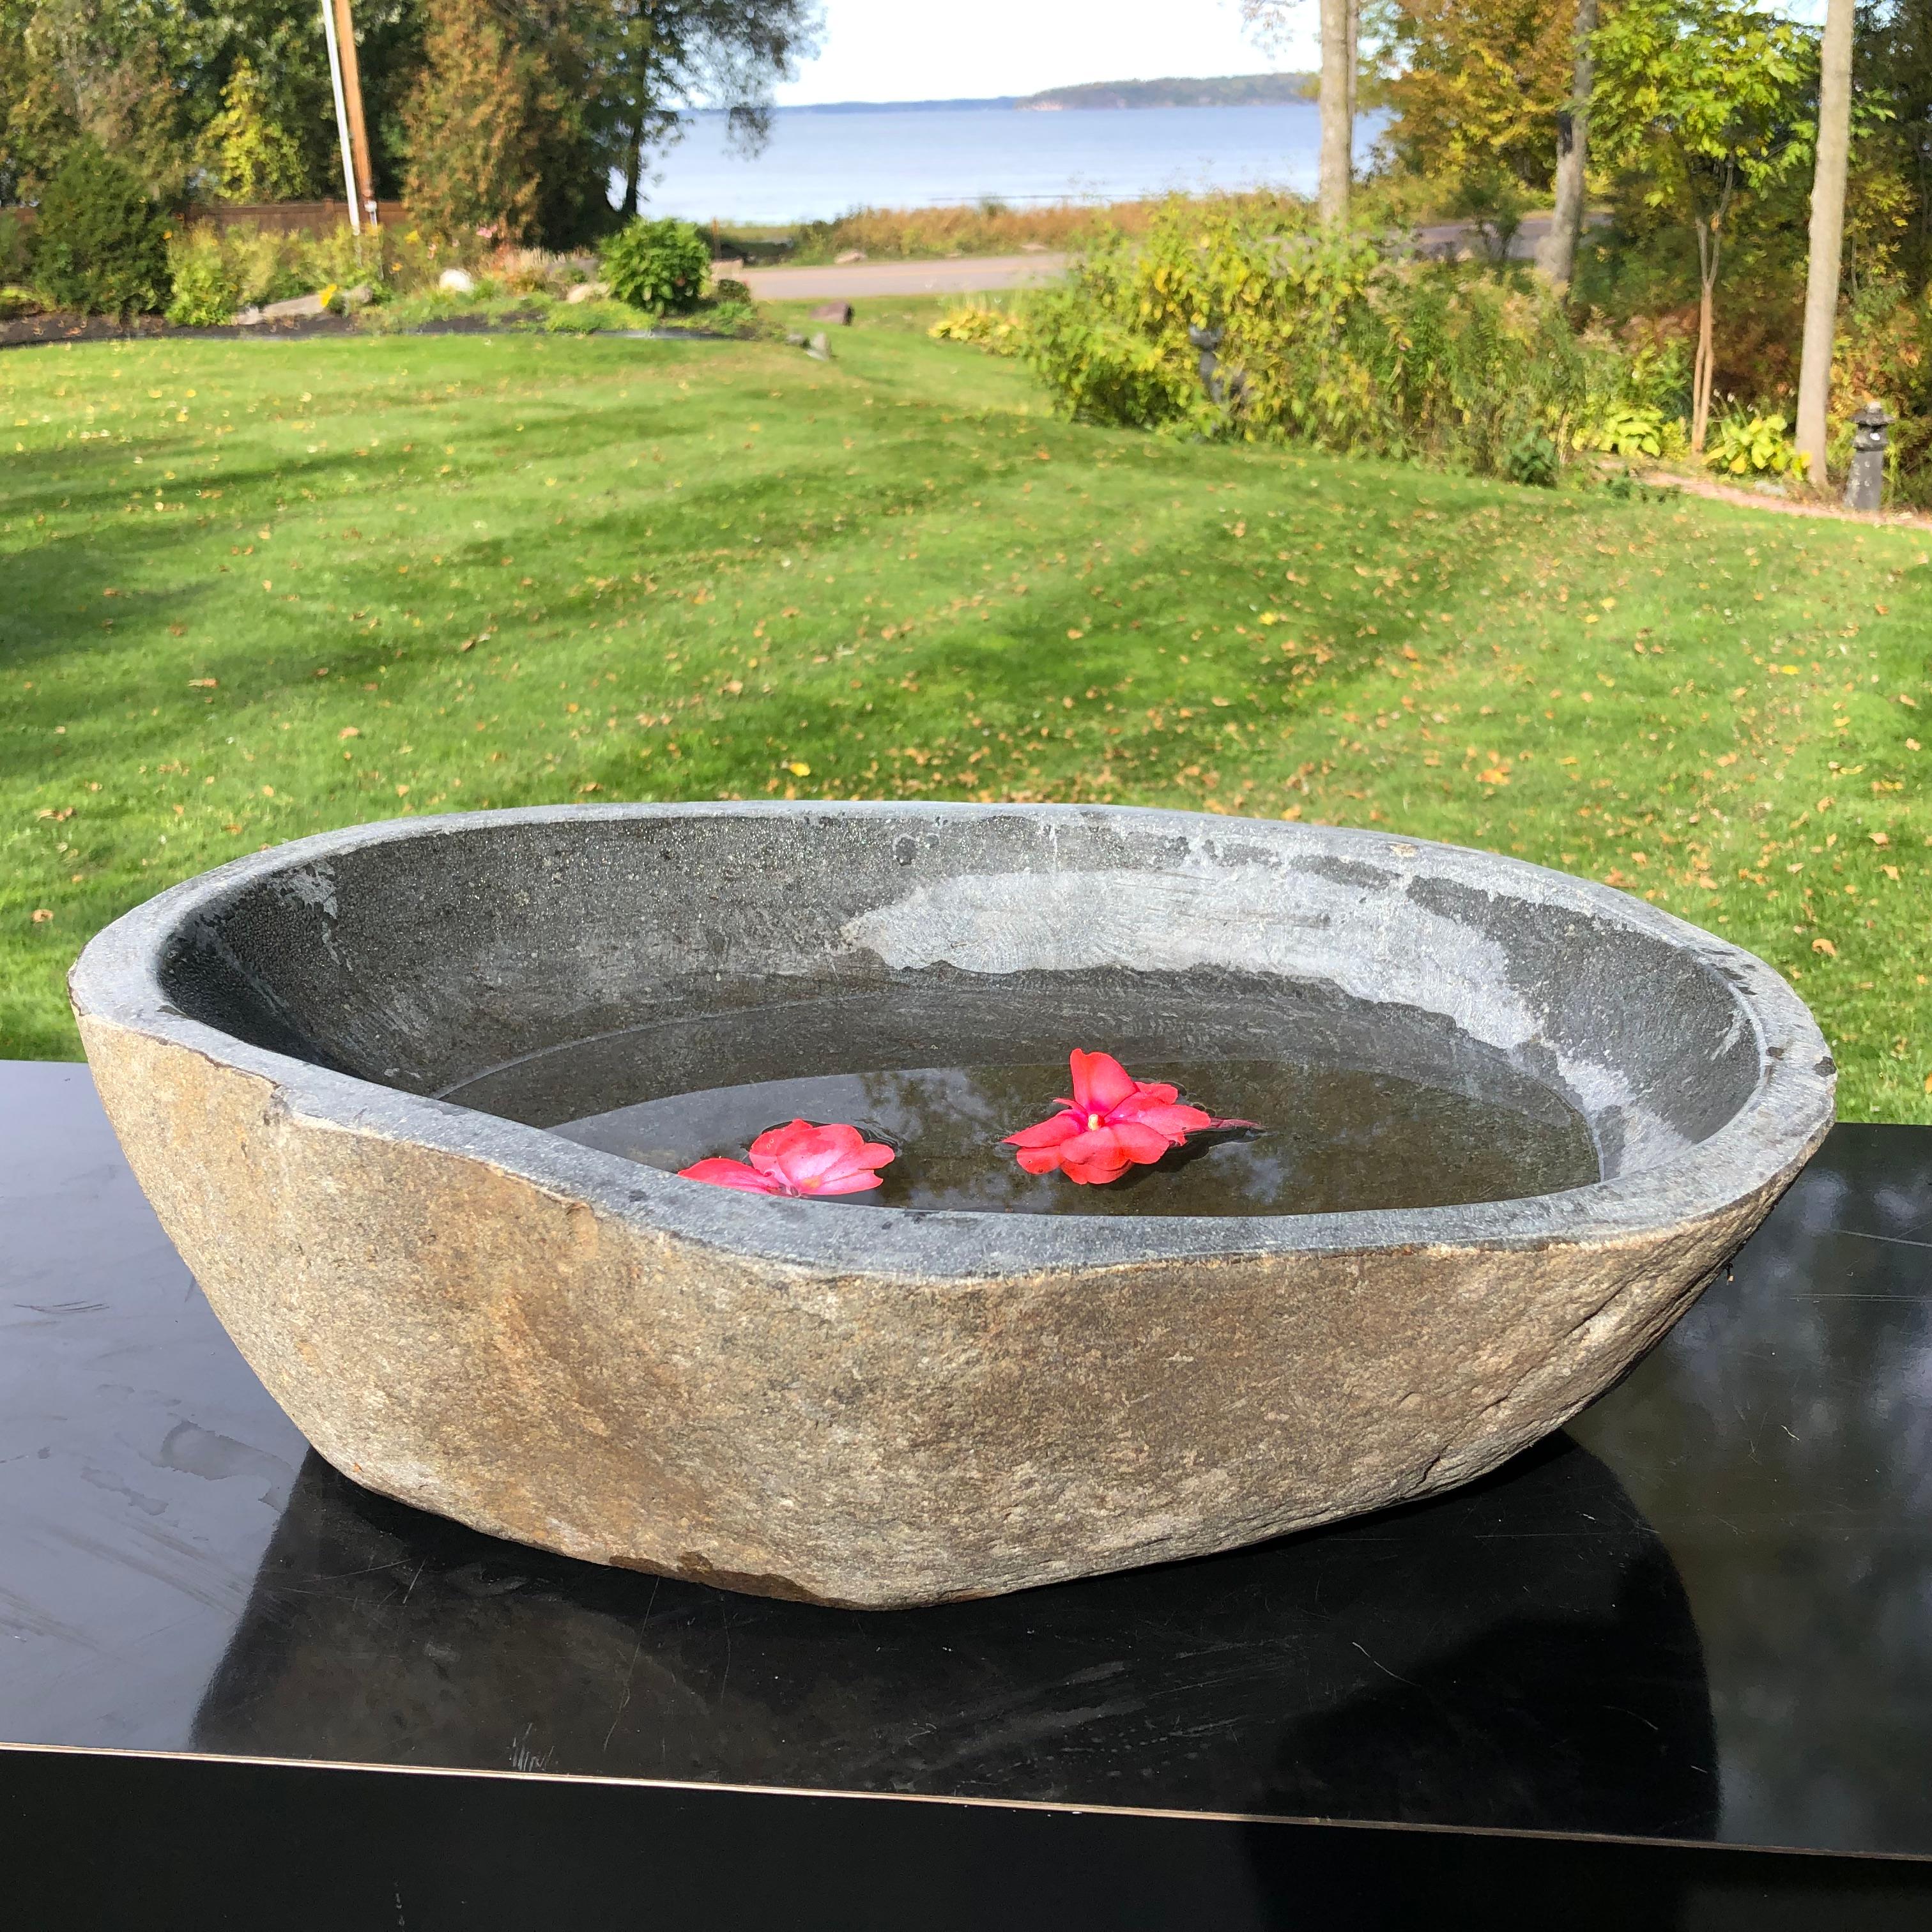 A one-of-a-kind visually attractive hand carved solid stone 
garden planter or water basin hand carved from a natural river boulder.

In an organic natural form.

Beautiful simple design. Inside smooth to the touch.

Totally natural color